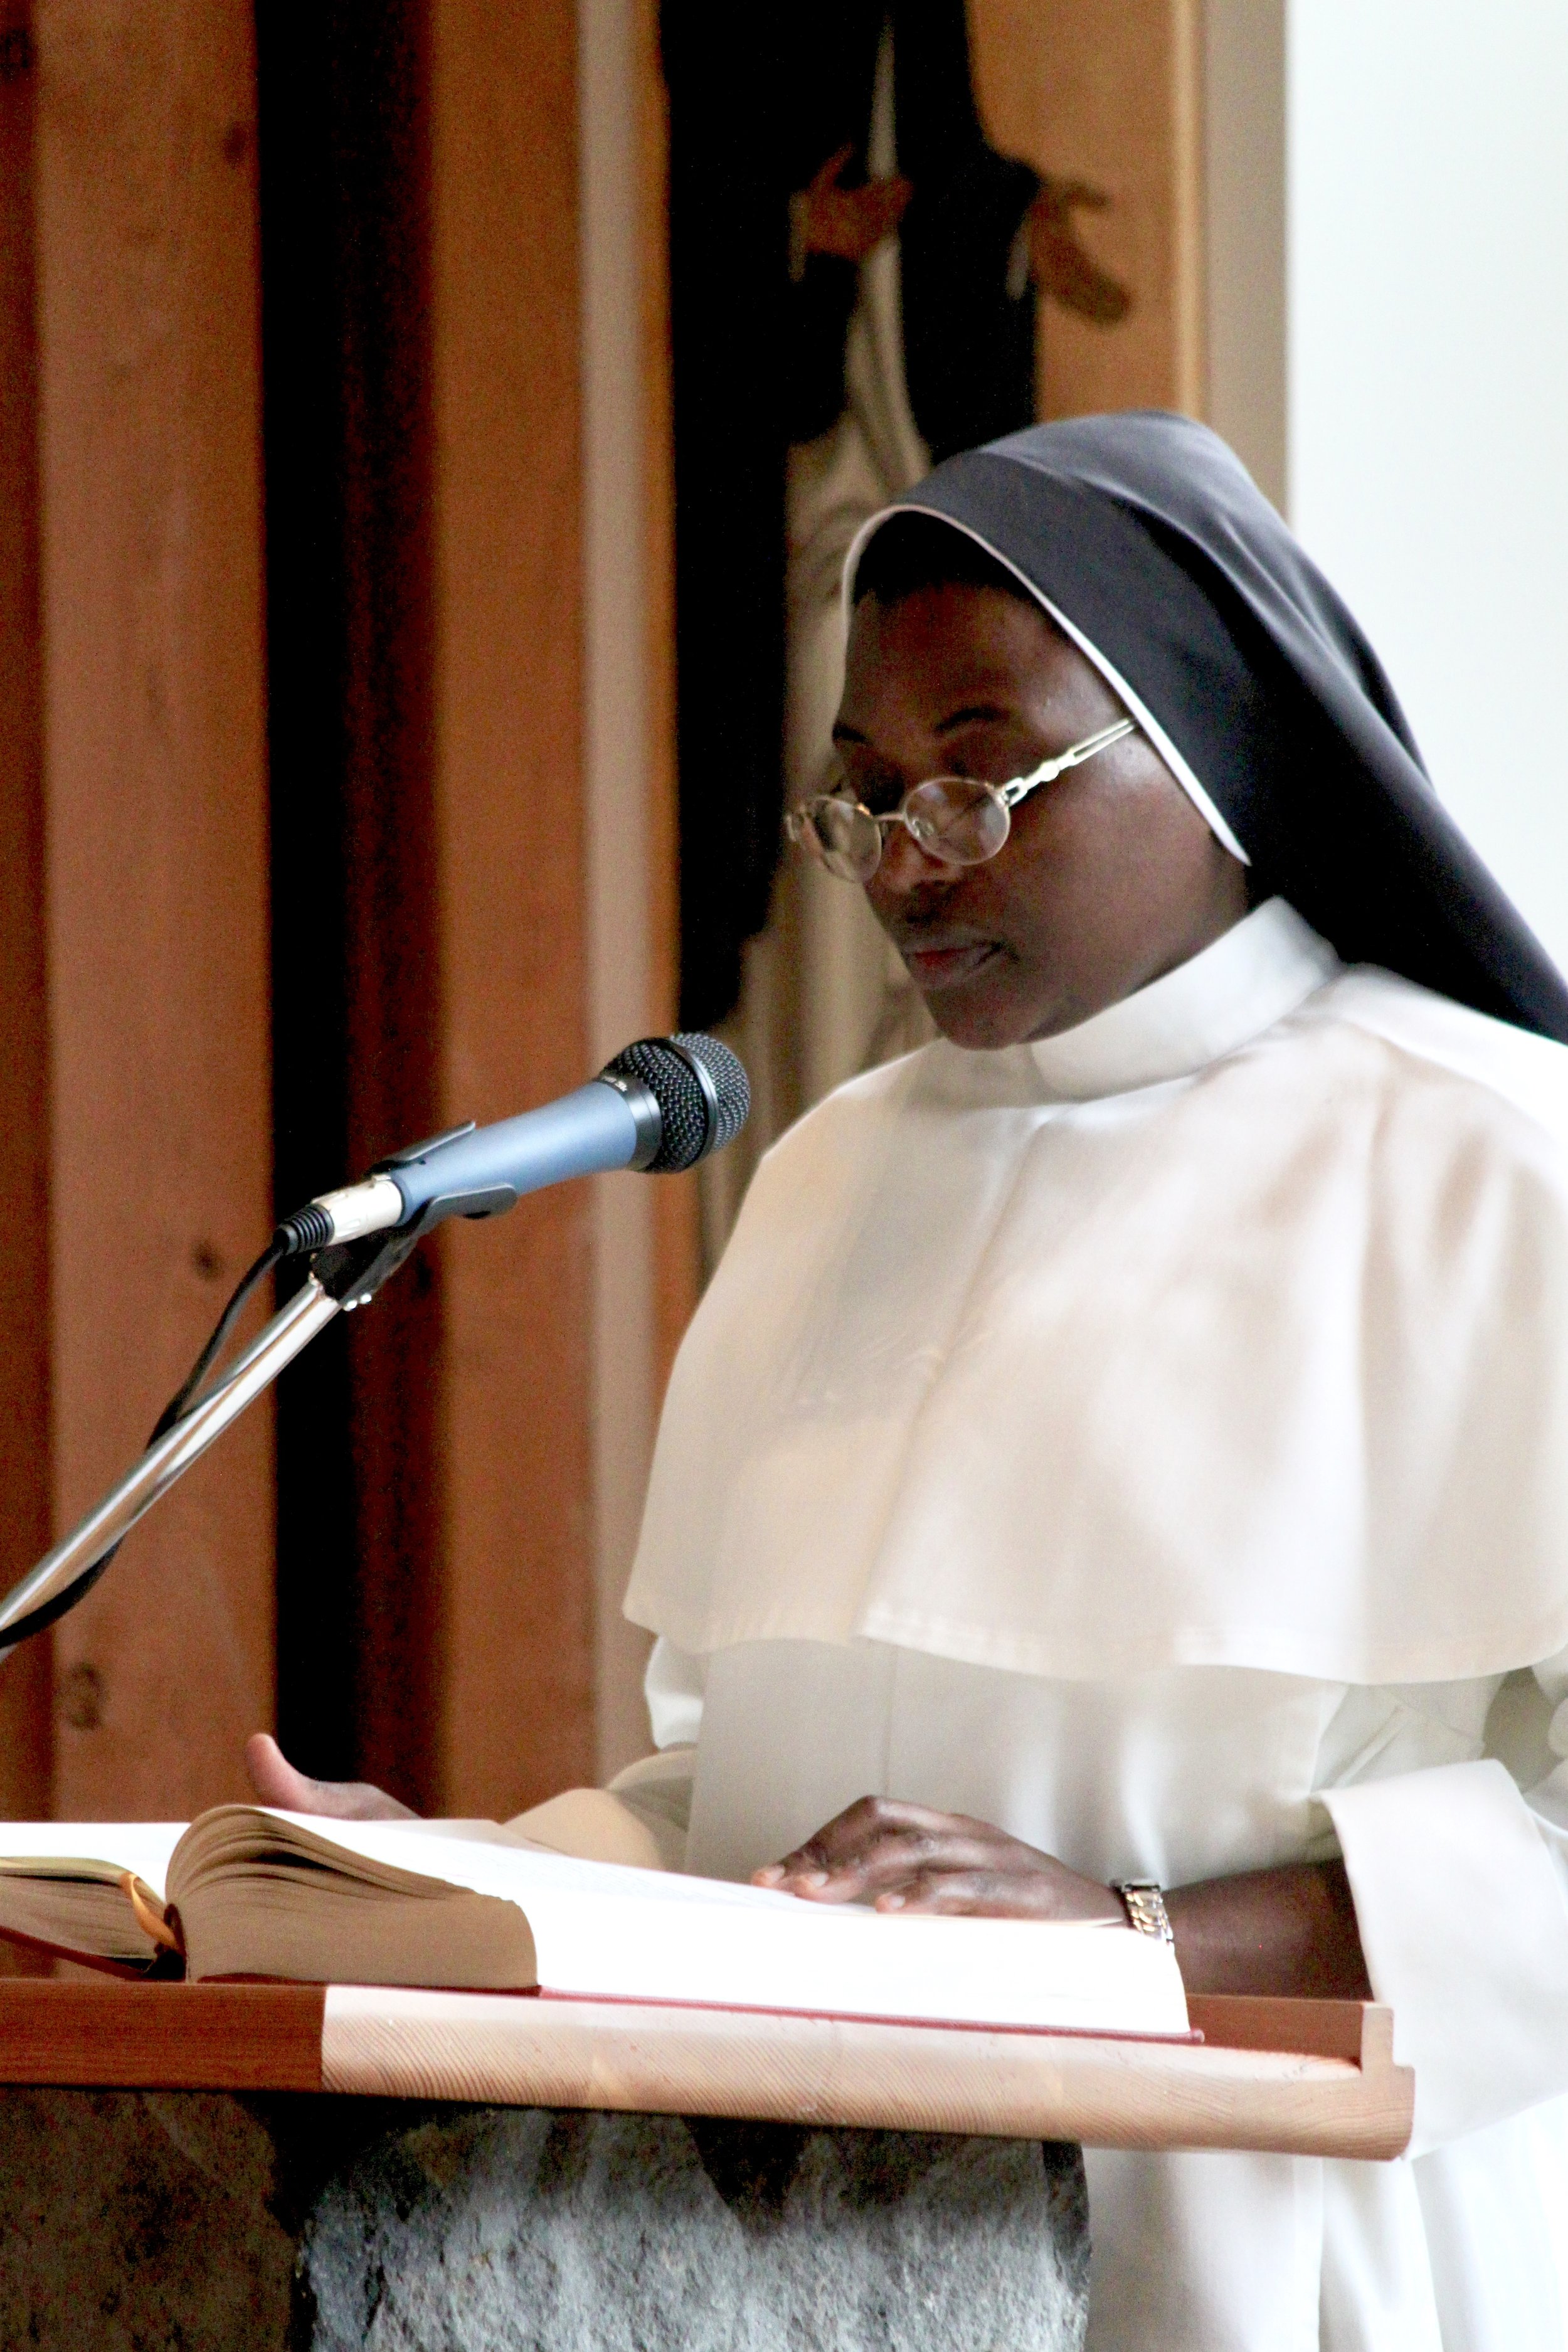  Sr. Marie Augustine, Sr. Florentina Marie’s blood sister from the Monastery of the Infant Jesus in Lufkin Texas, was one of the lectors. 